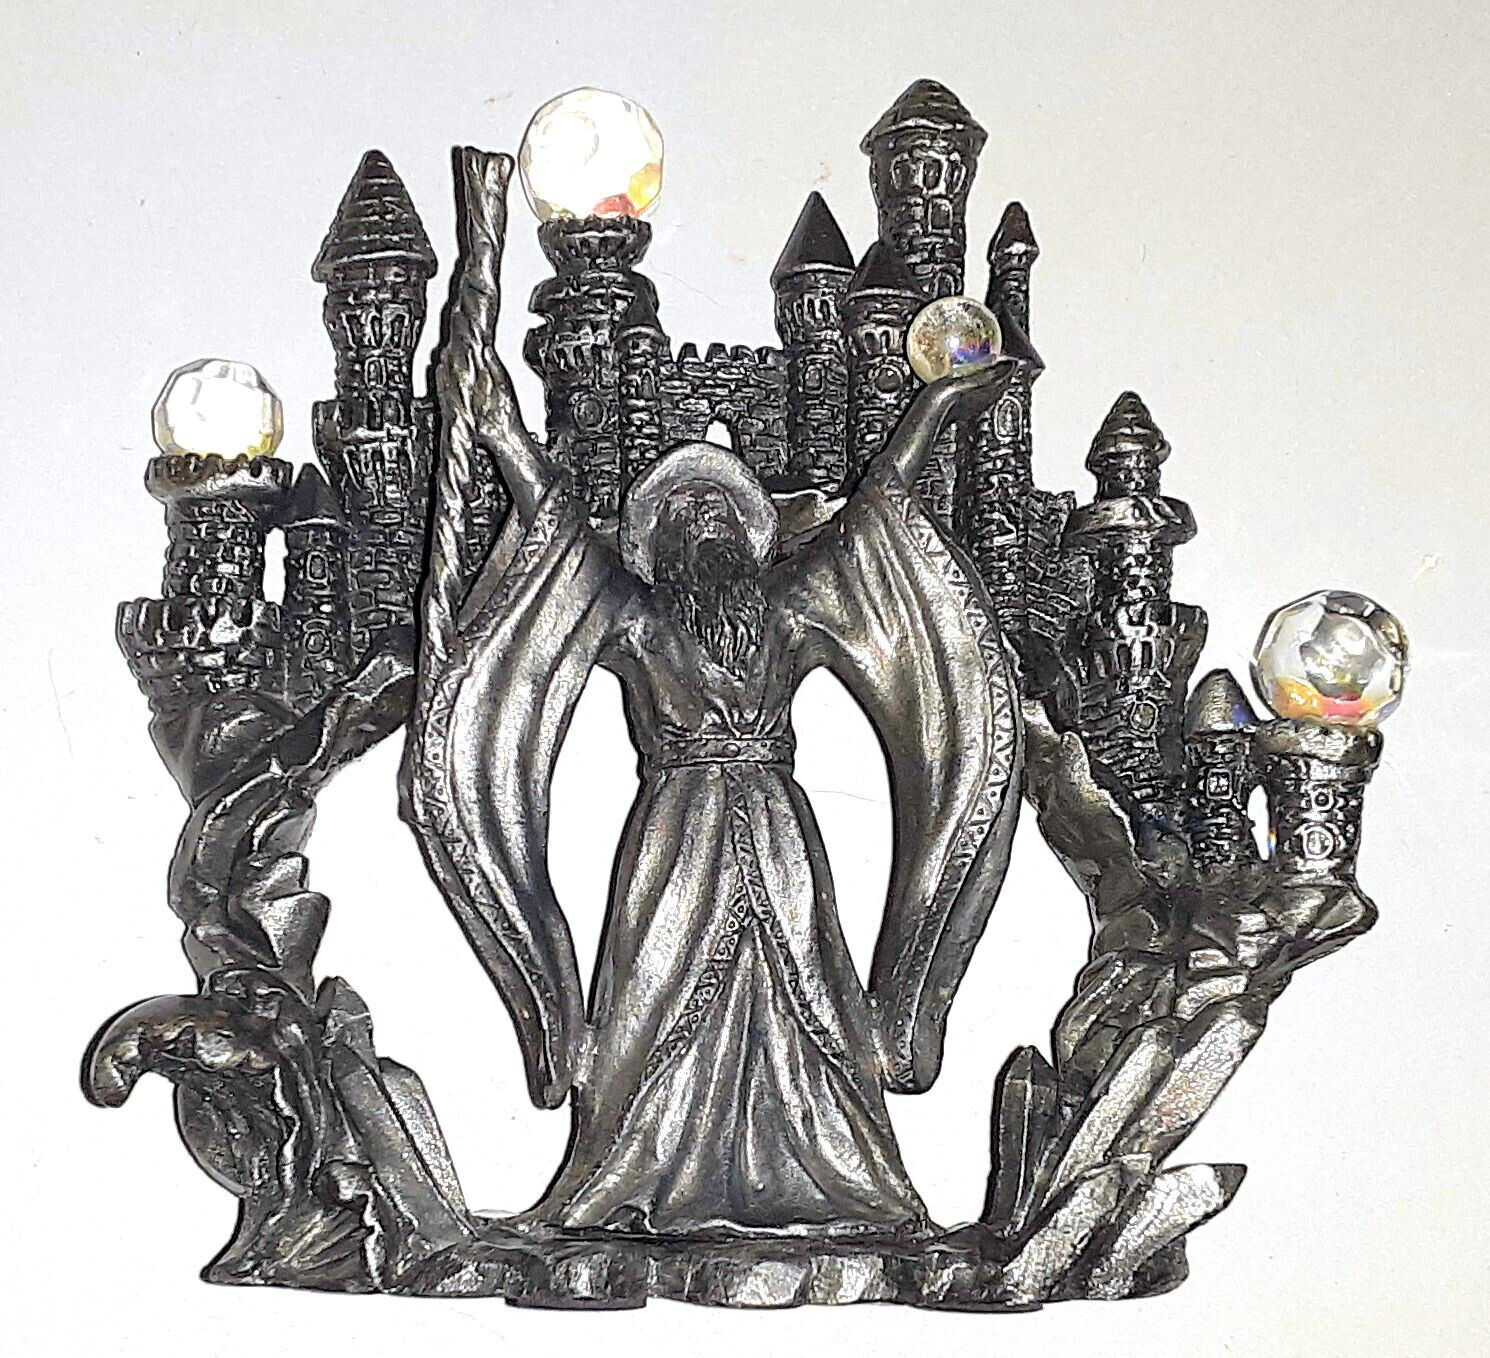 Pewter & Crystals - Wizard, Castle and Orbs - Fantasy Sculpture